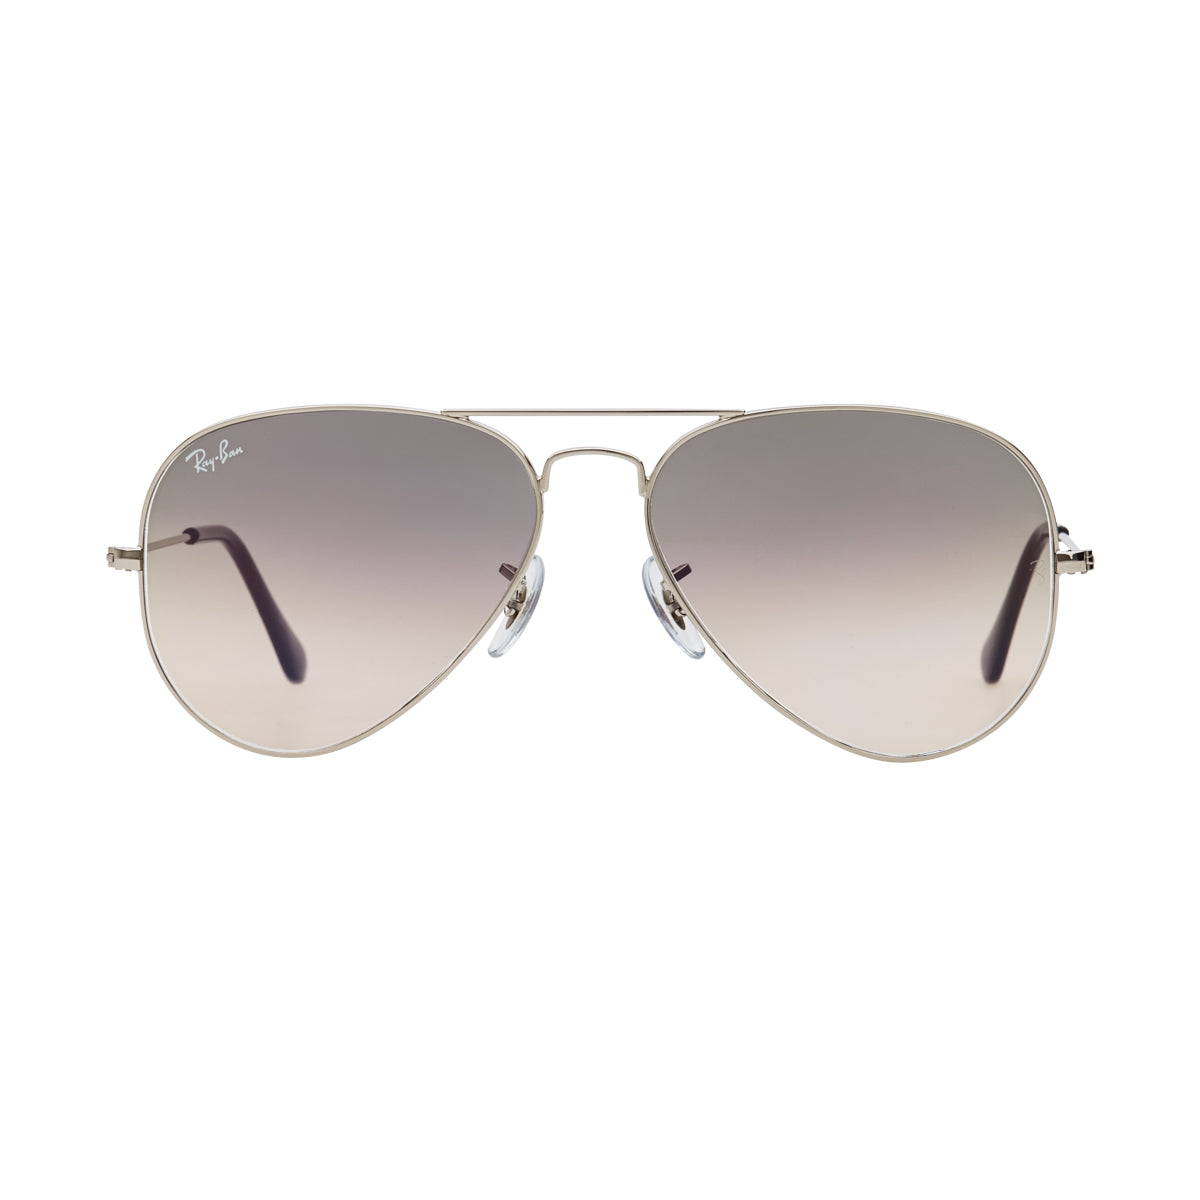 Ray-Ban Aviator Gradient RB3025 Sunglasses - Grey/Silver Front